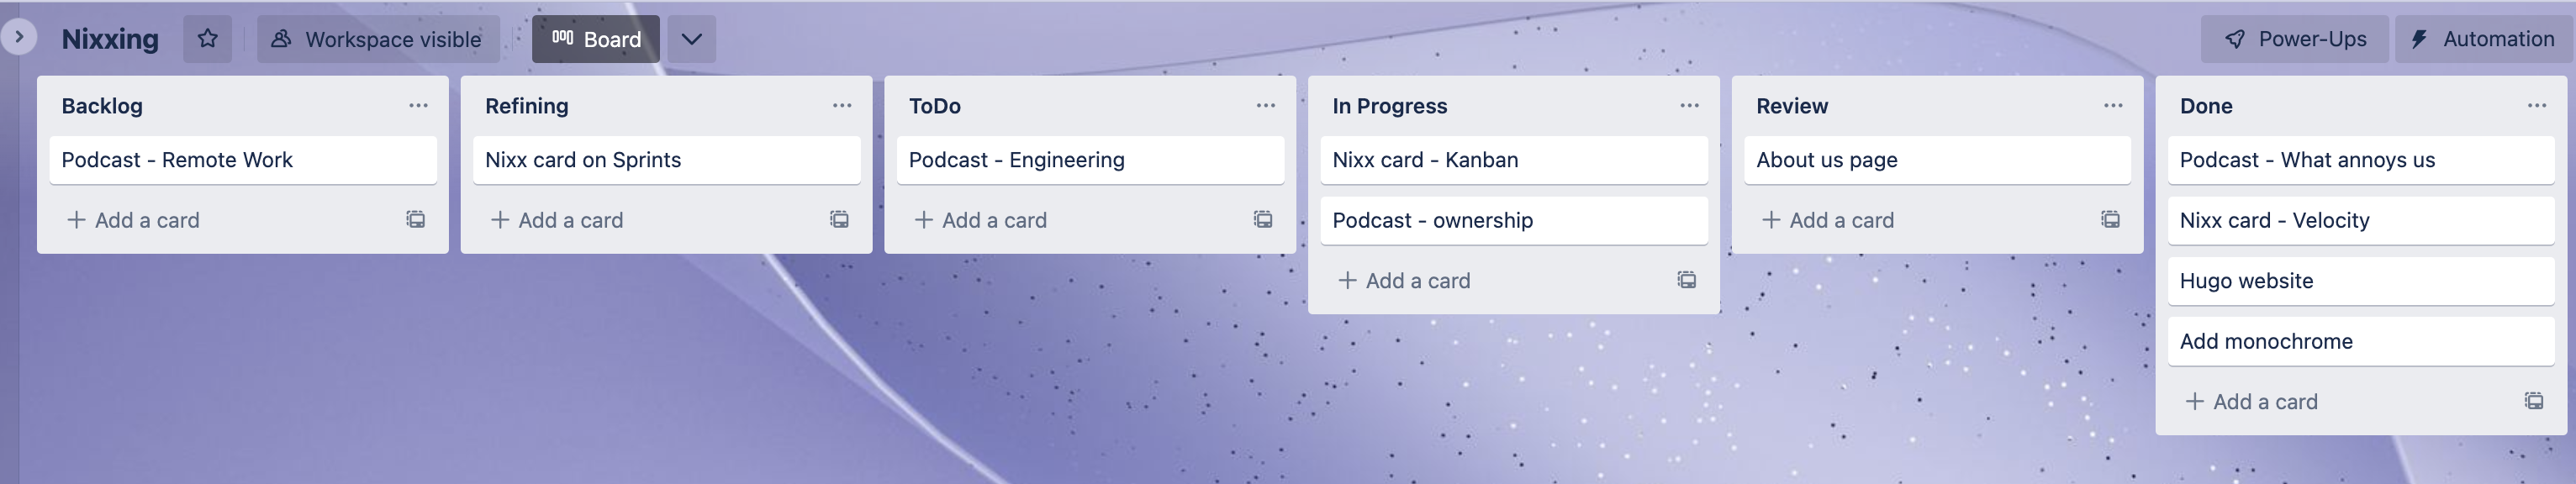 template for a kanban board